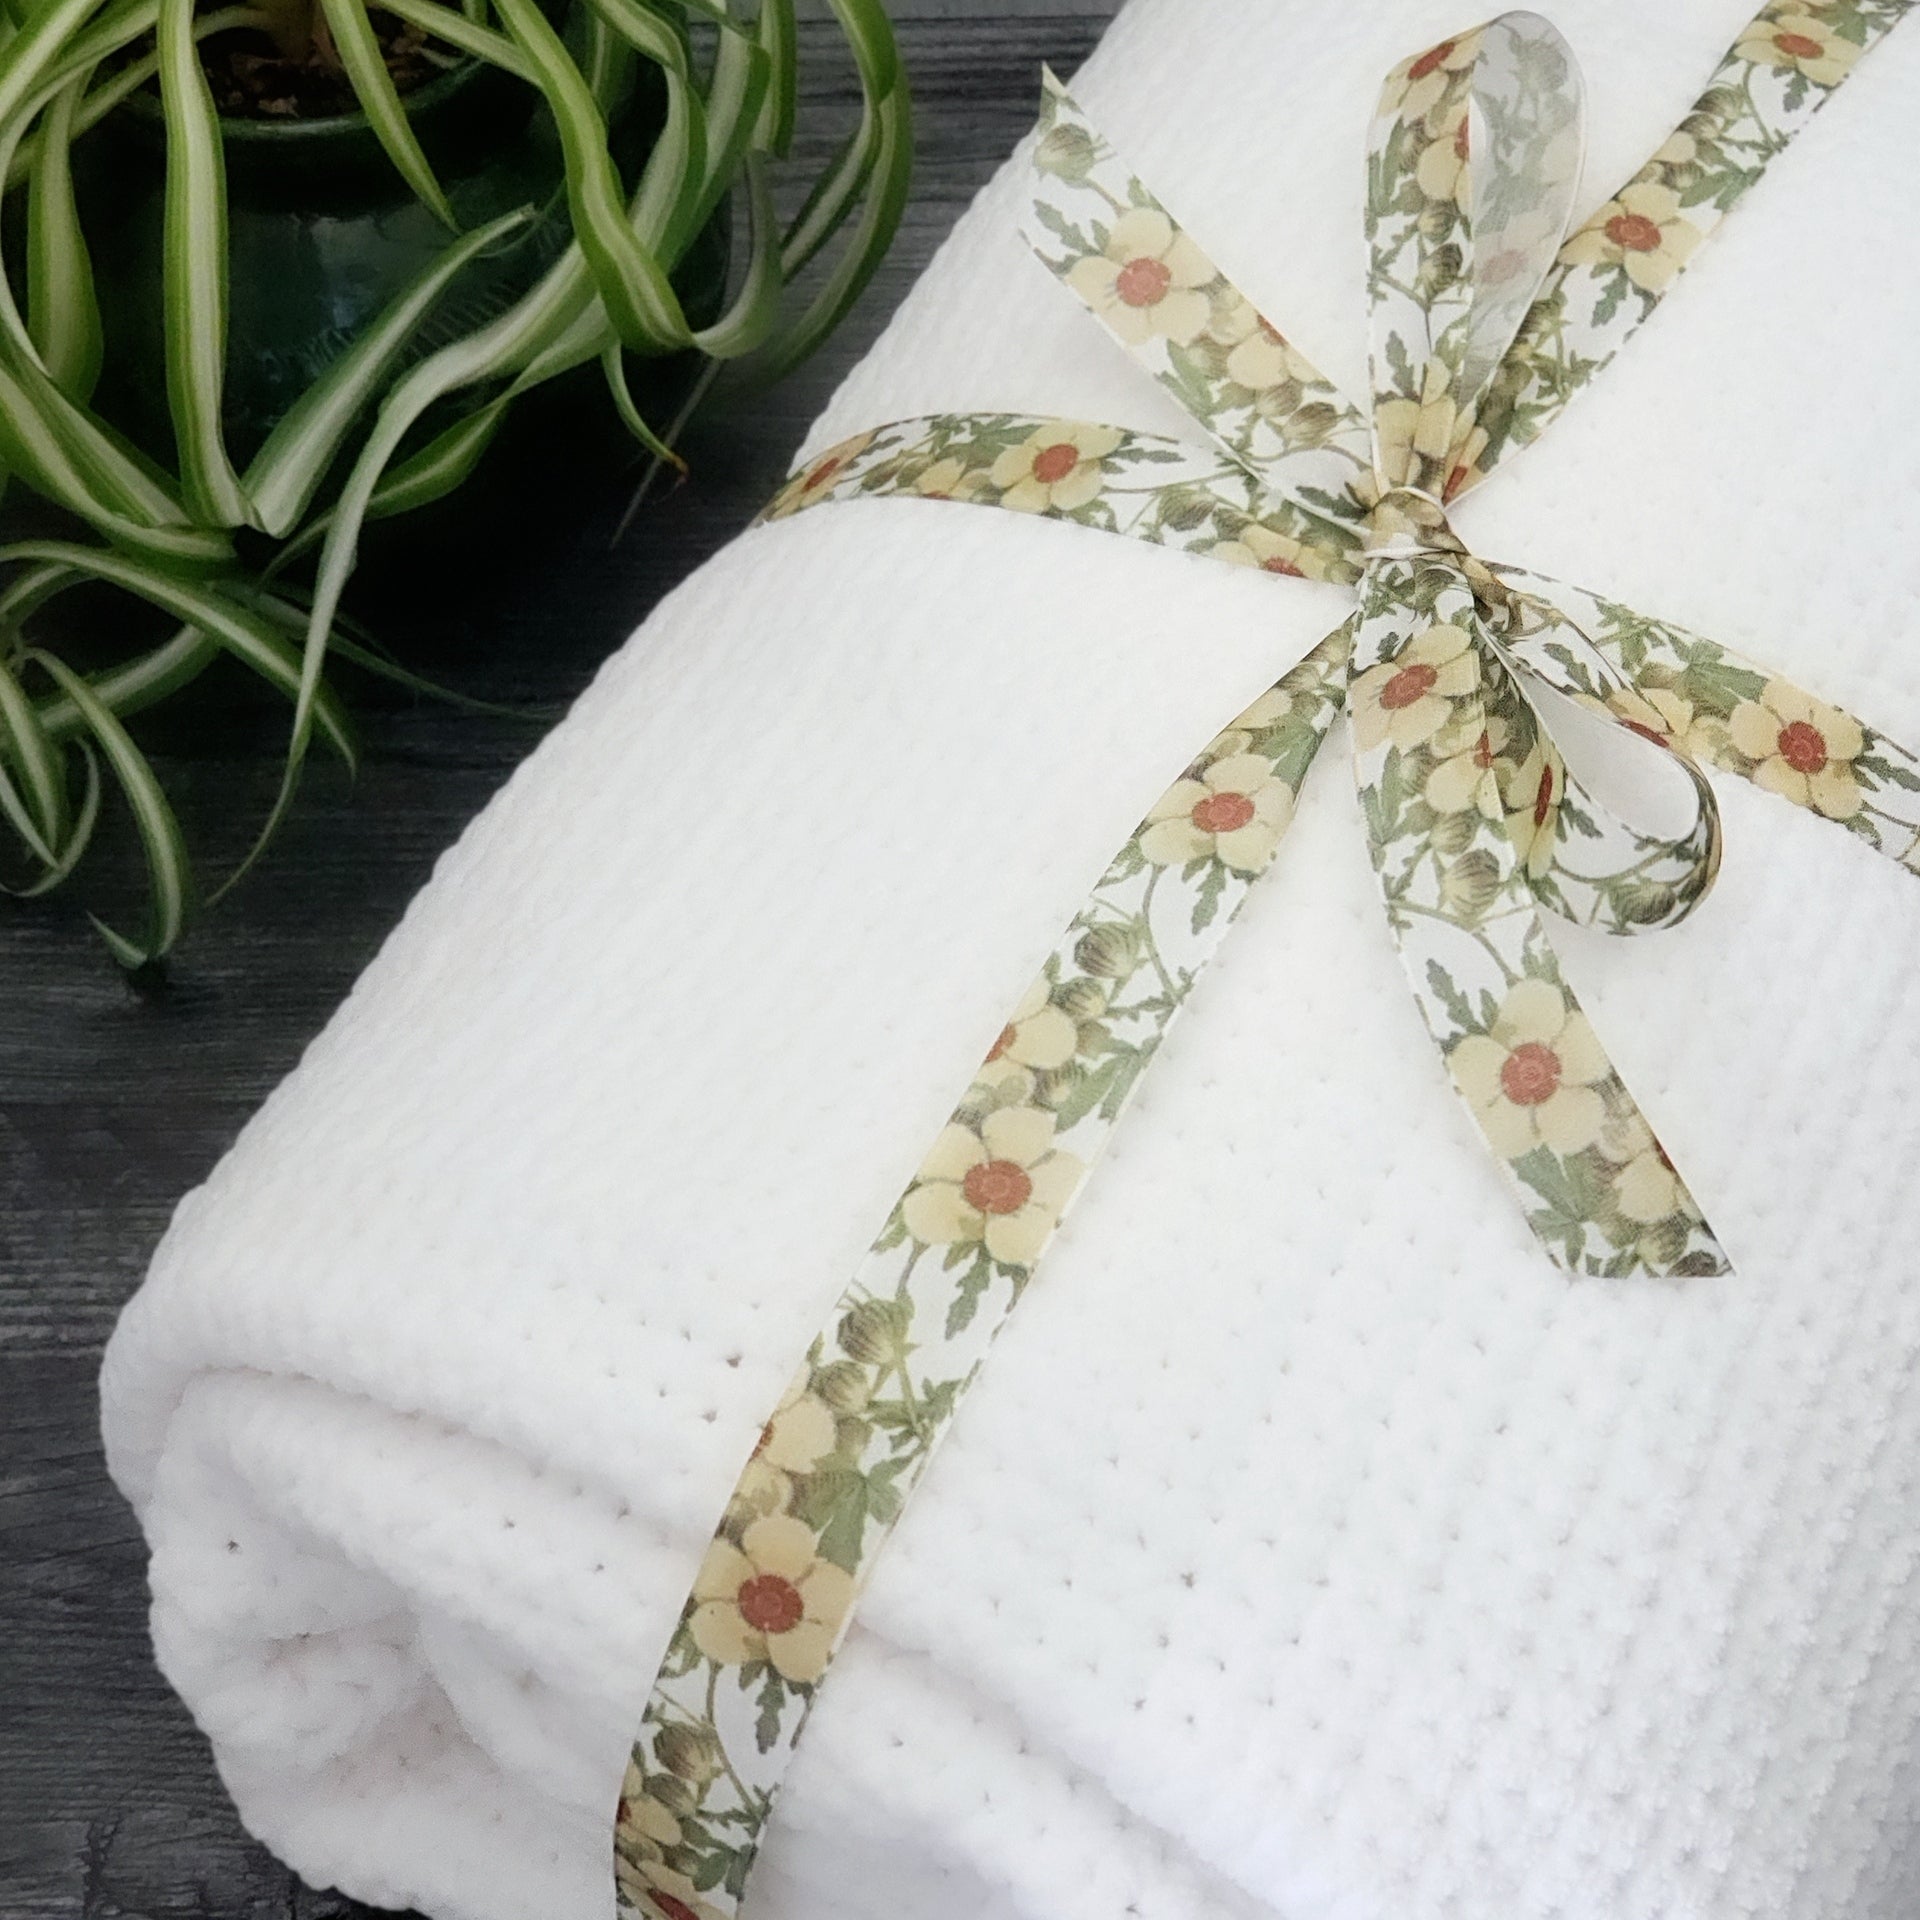 Lush: The 'un-holey' XL Chenille Throw - in White - Limited Edition